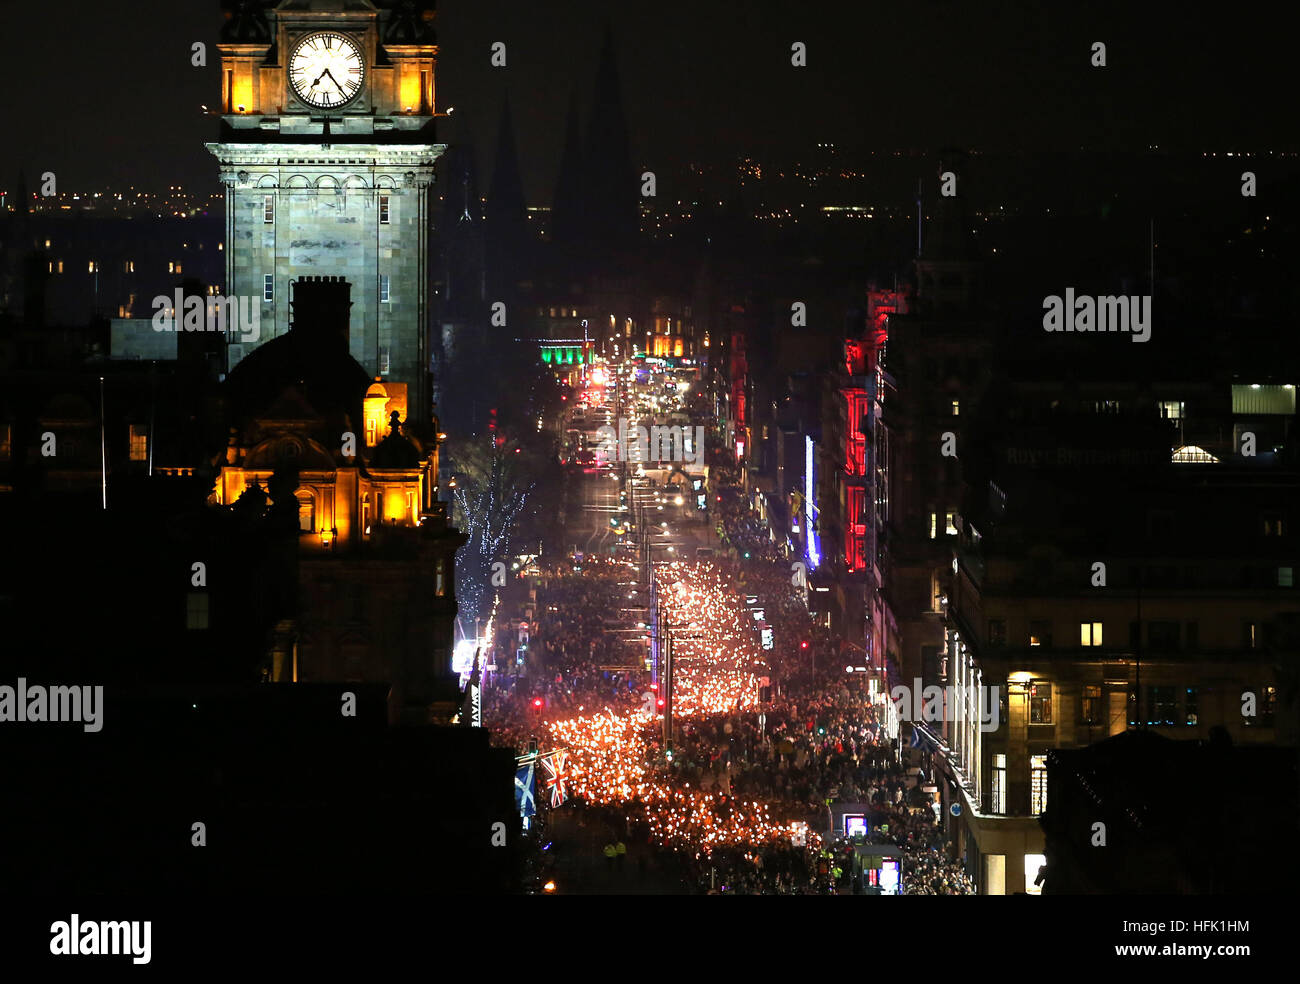 The opening event of Edinburgh's Hogmanay celebrations begins with the annual Torchlight Procession, as thousands of torch carriers led by Shetland's Up Helly Aa' Vikings and the massed pipes and drums march through the city centre to a spectacular fireworks finale ahead of the Hogmanay celebrations for the New Year. Stock Photo